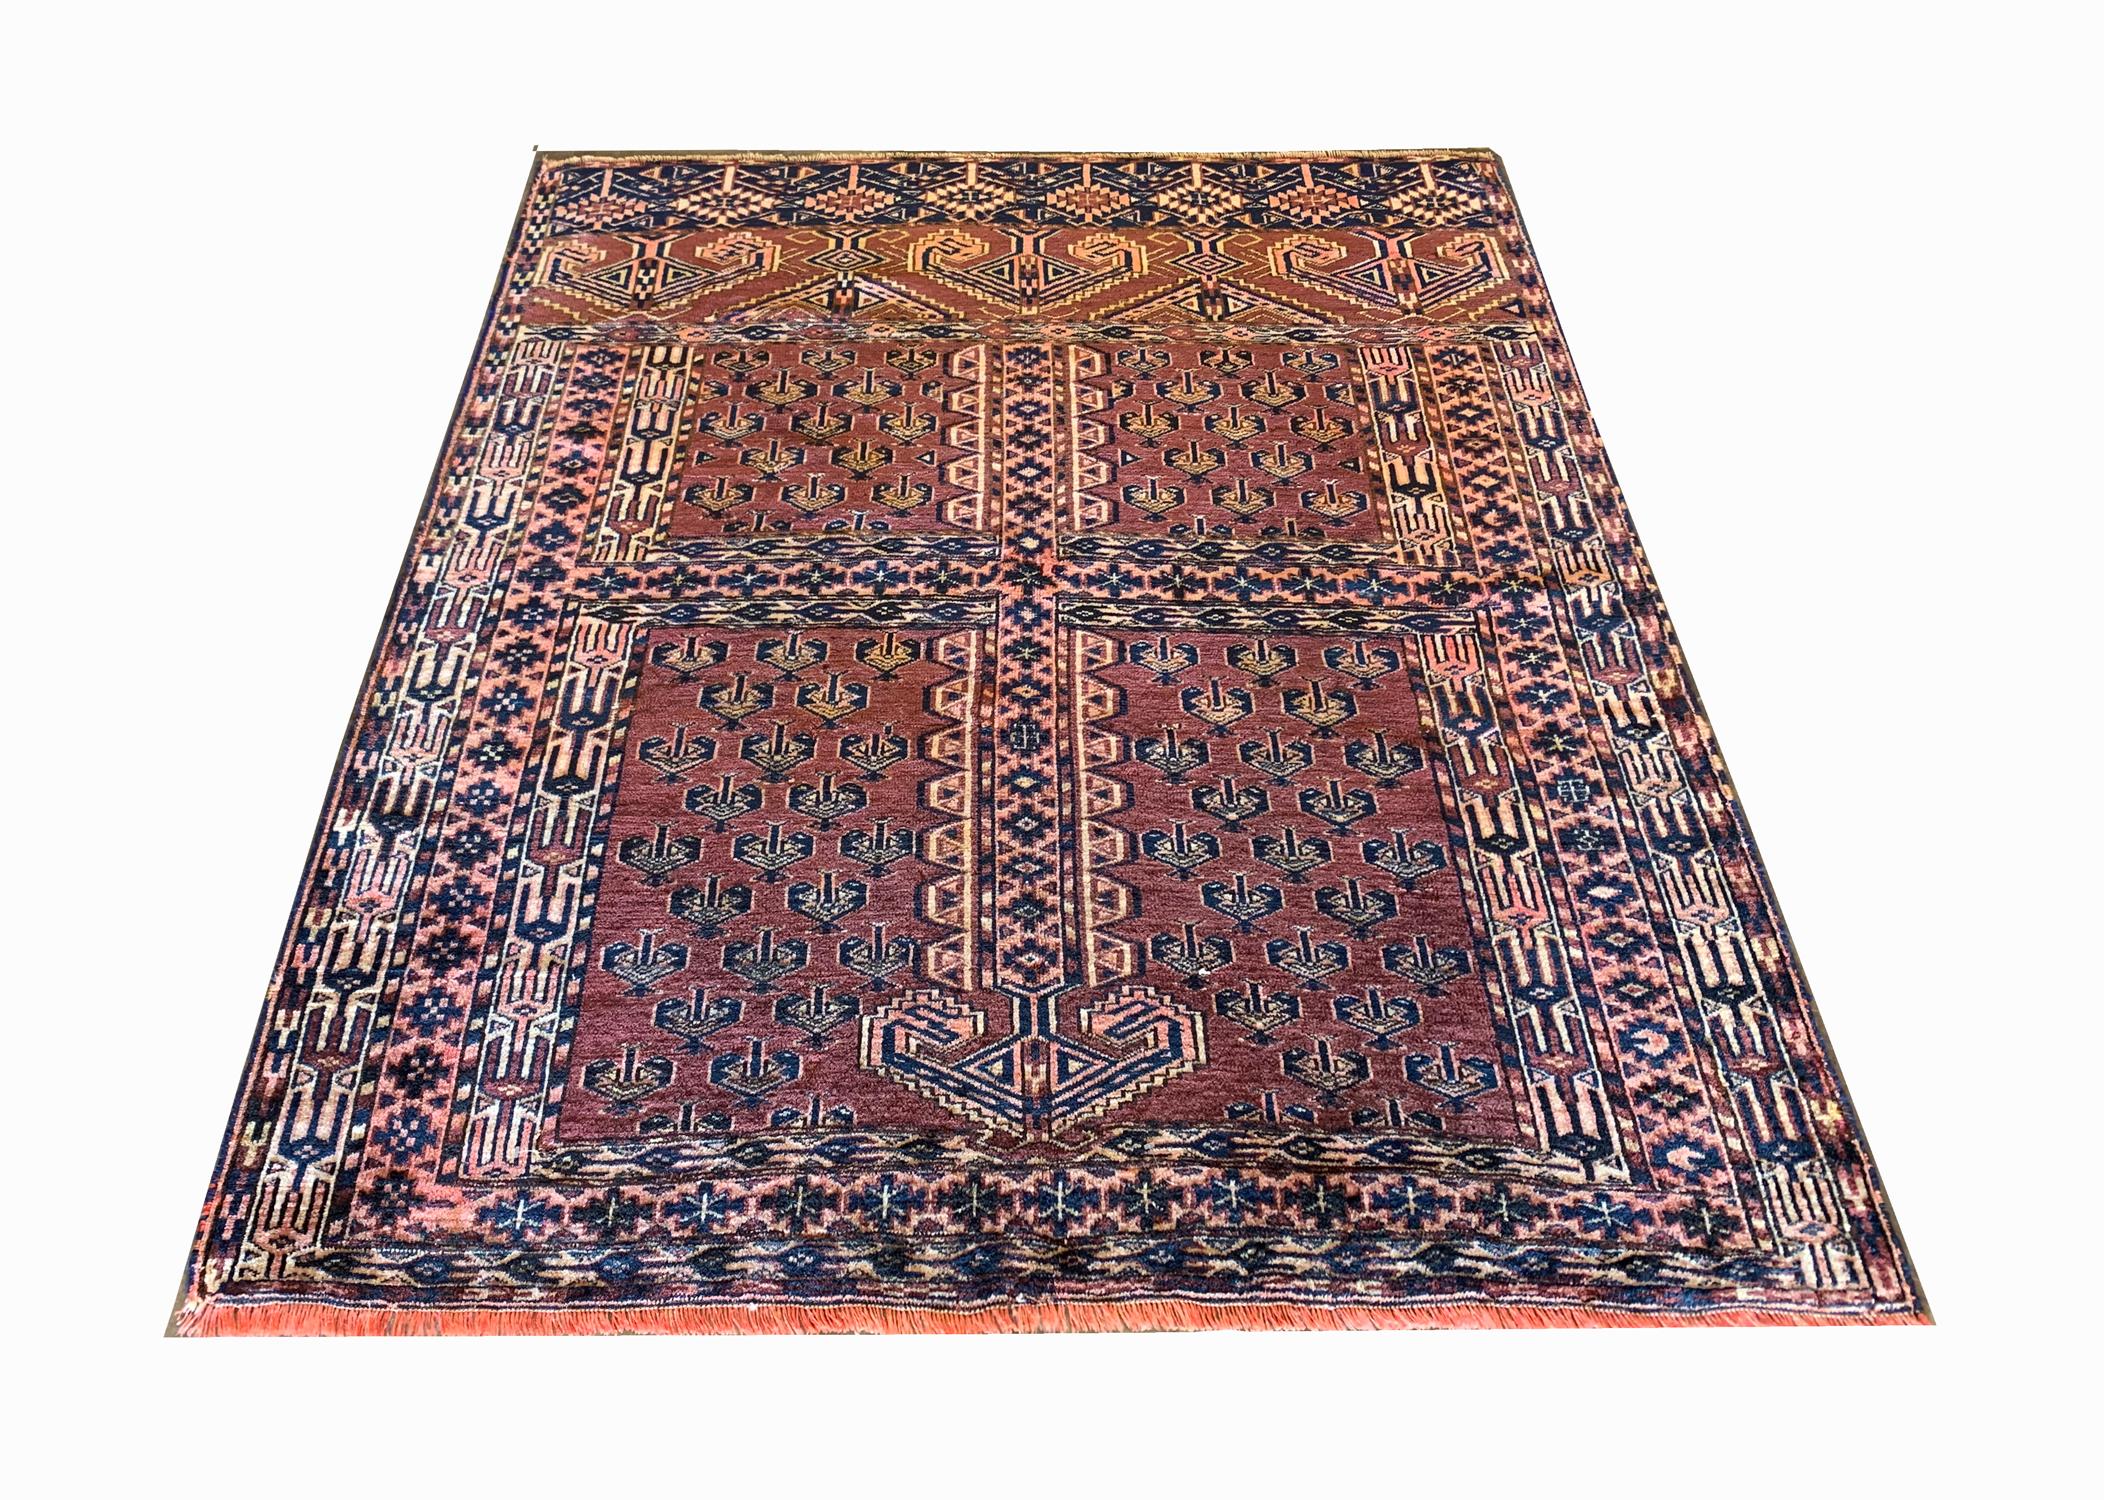 This elegant handwoven Turkmen antique Rug is woven in the 1880s with sophistication. It features a highly-decorative central design that has been woven on a rust background with blue, beige and orange accents that make up the symmetrical tribal